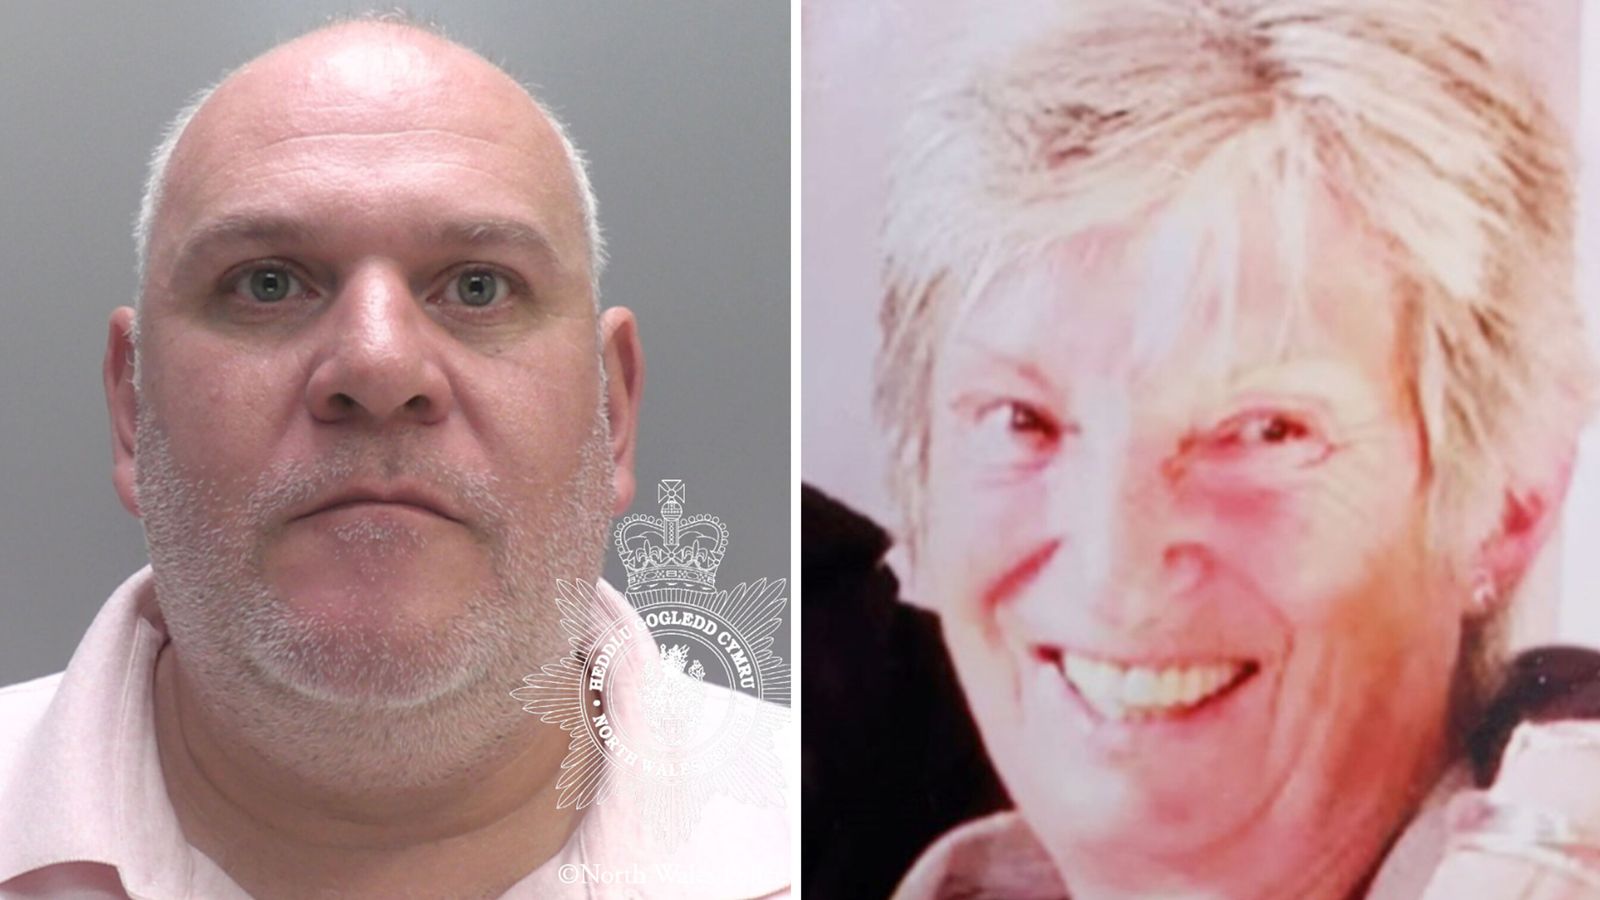 Man jailed for life after murdering pensioner who mistook his home for B&B and got into his bed